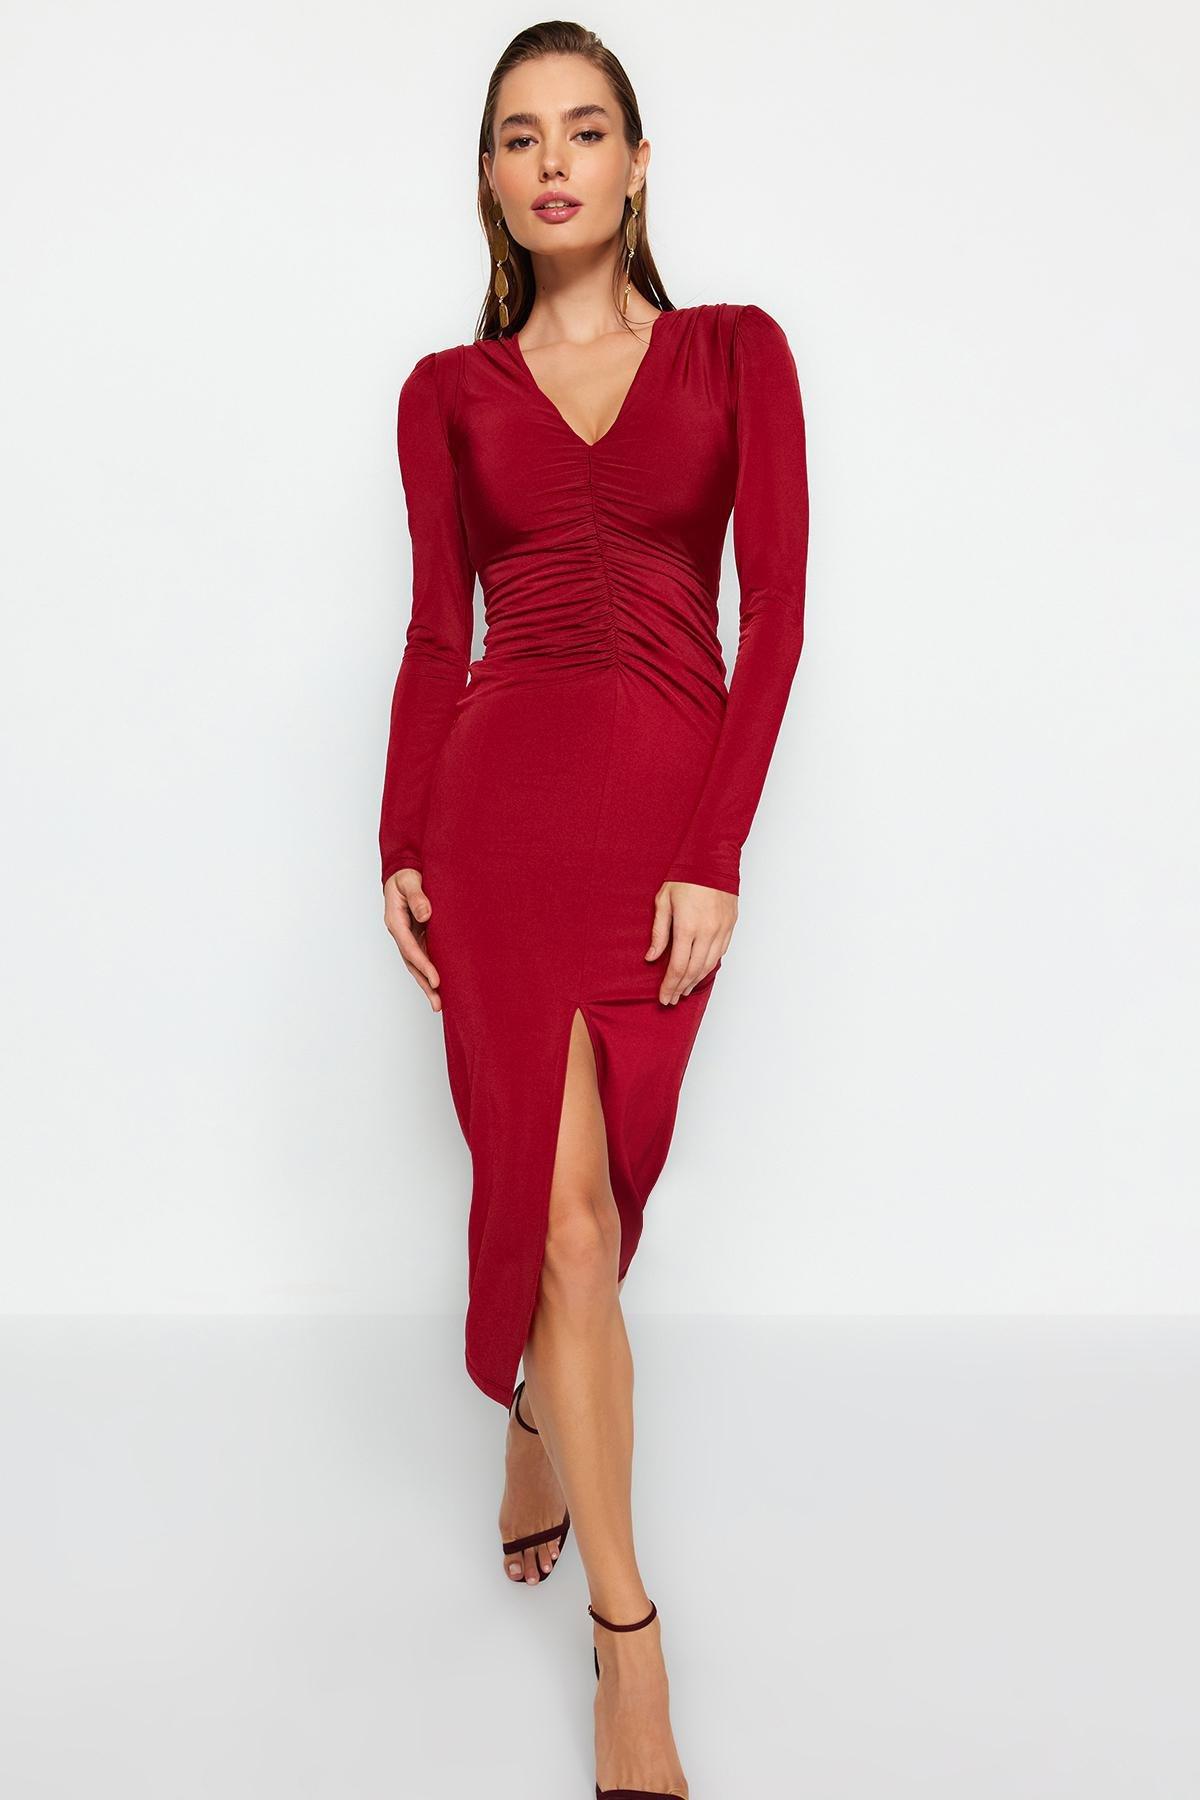 Trendyol - Burgundy Fitted Knitted Evening Dress